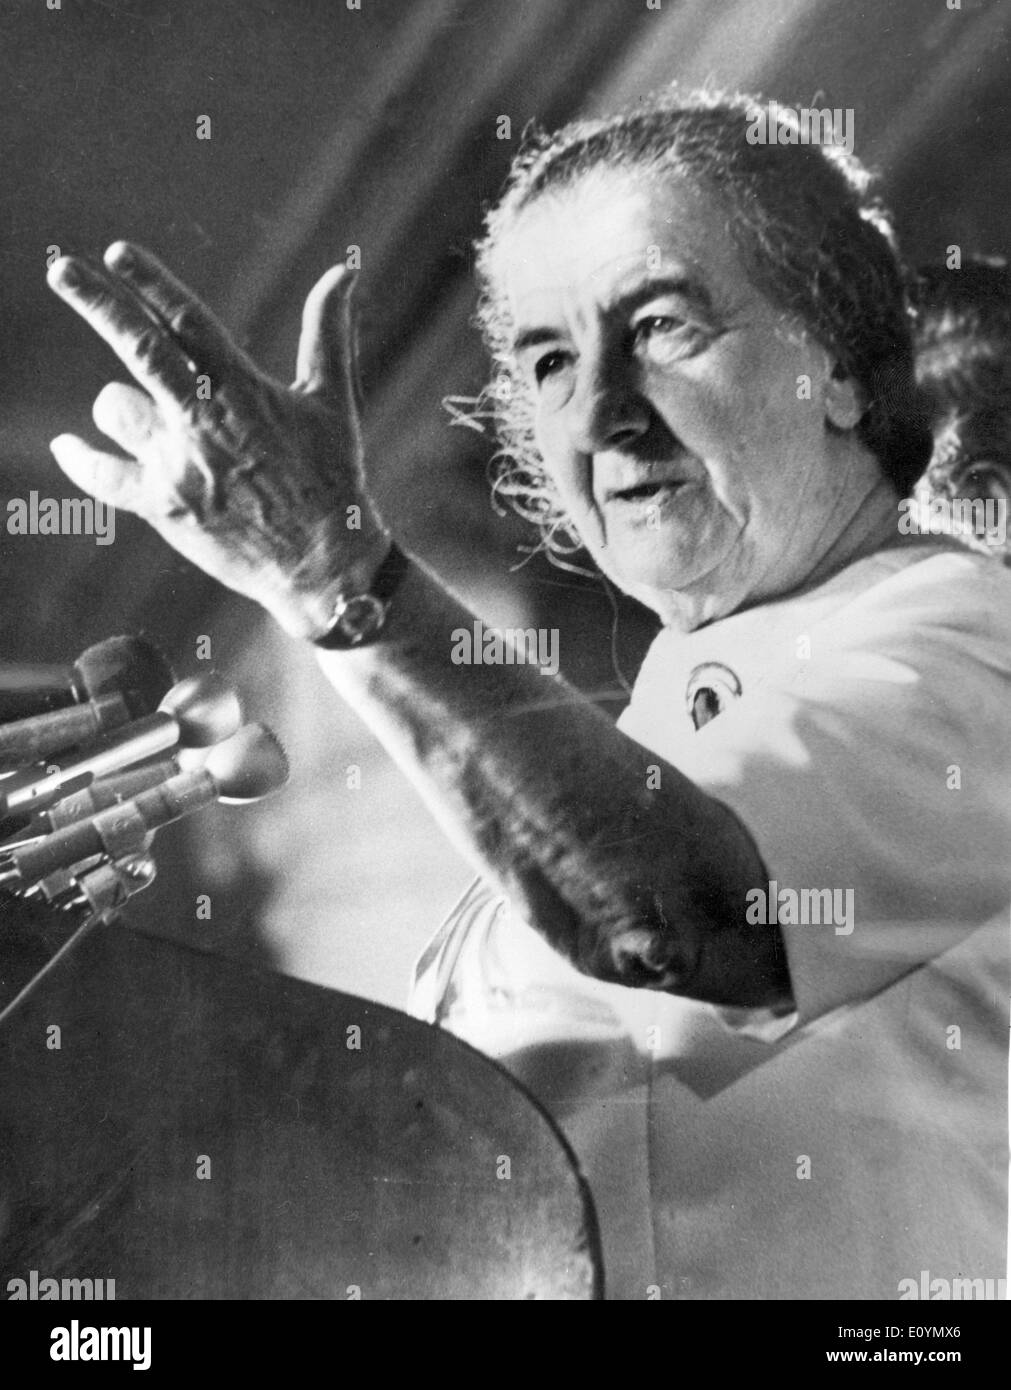 Prime Minister Golda Meir gives a speech Stock Photo